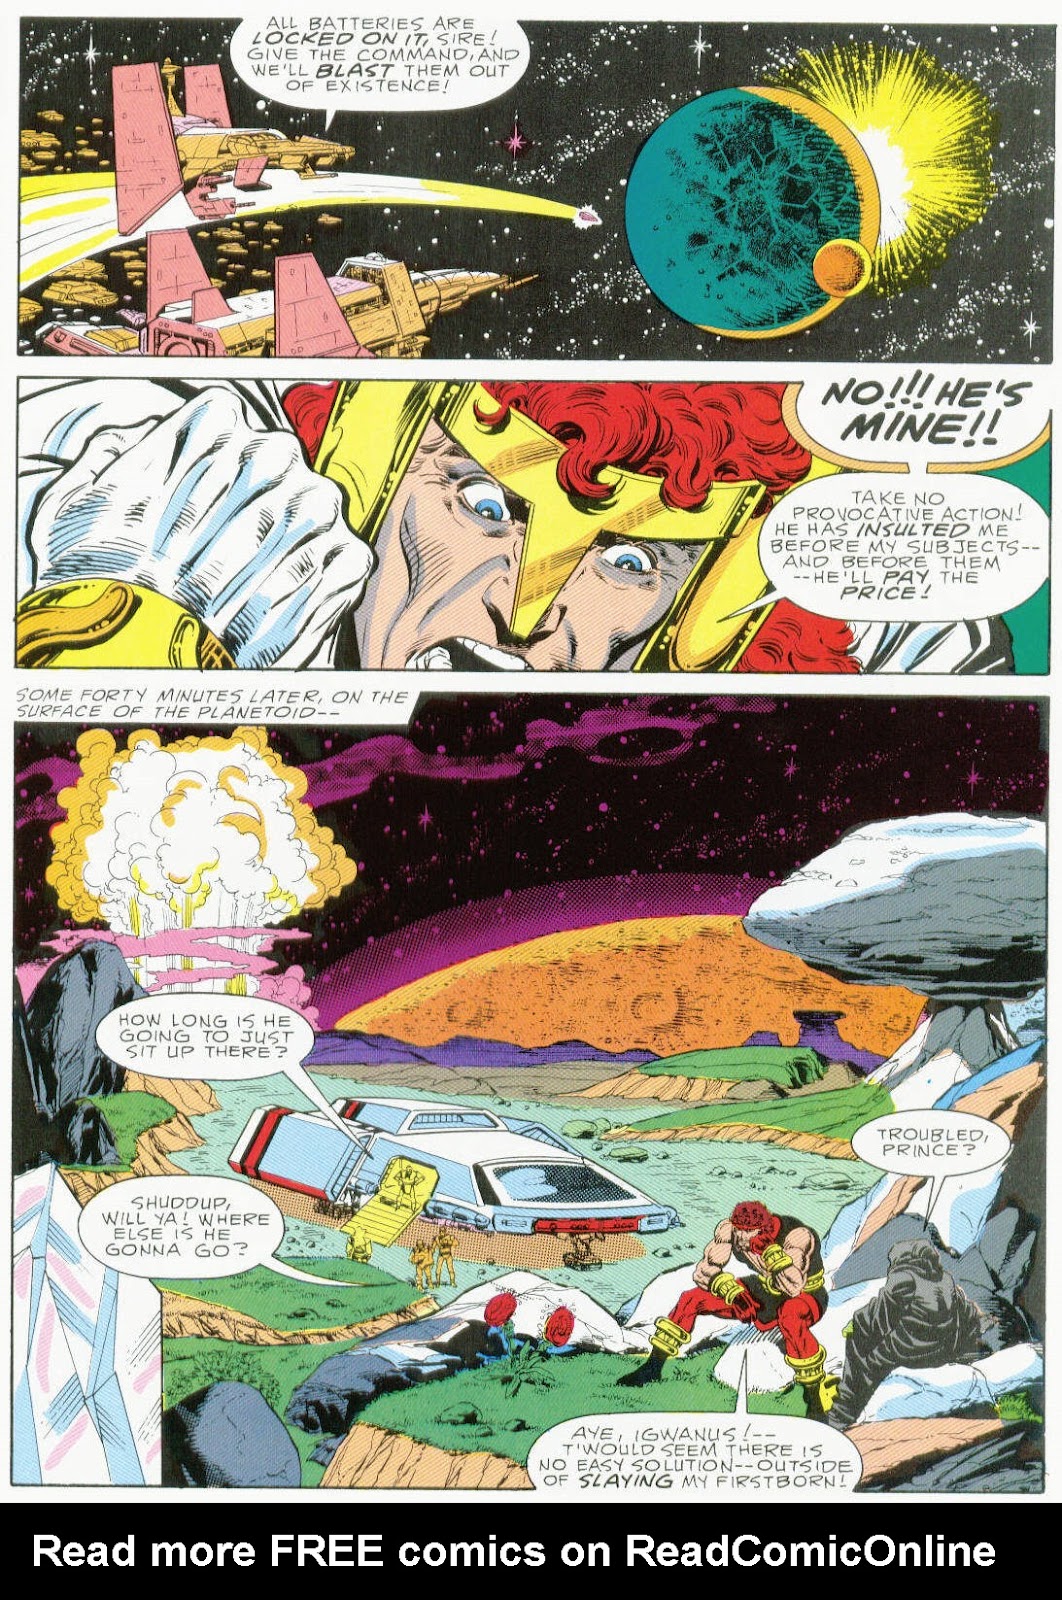 Marvel Graphic Novel issue 37 - Hercules Prince of Power - Full Circle - Page 63